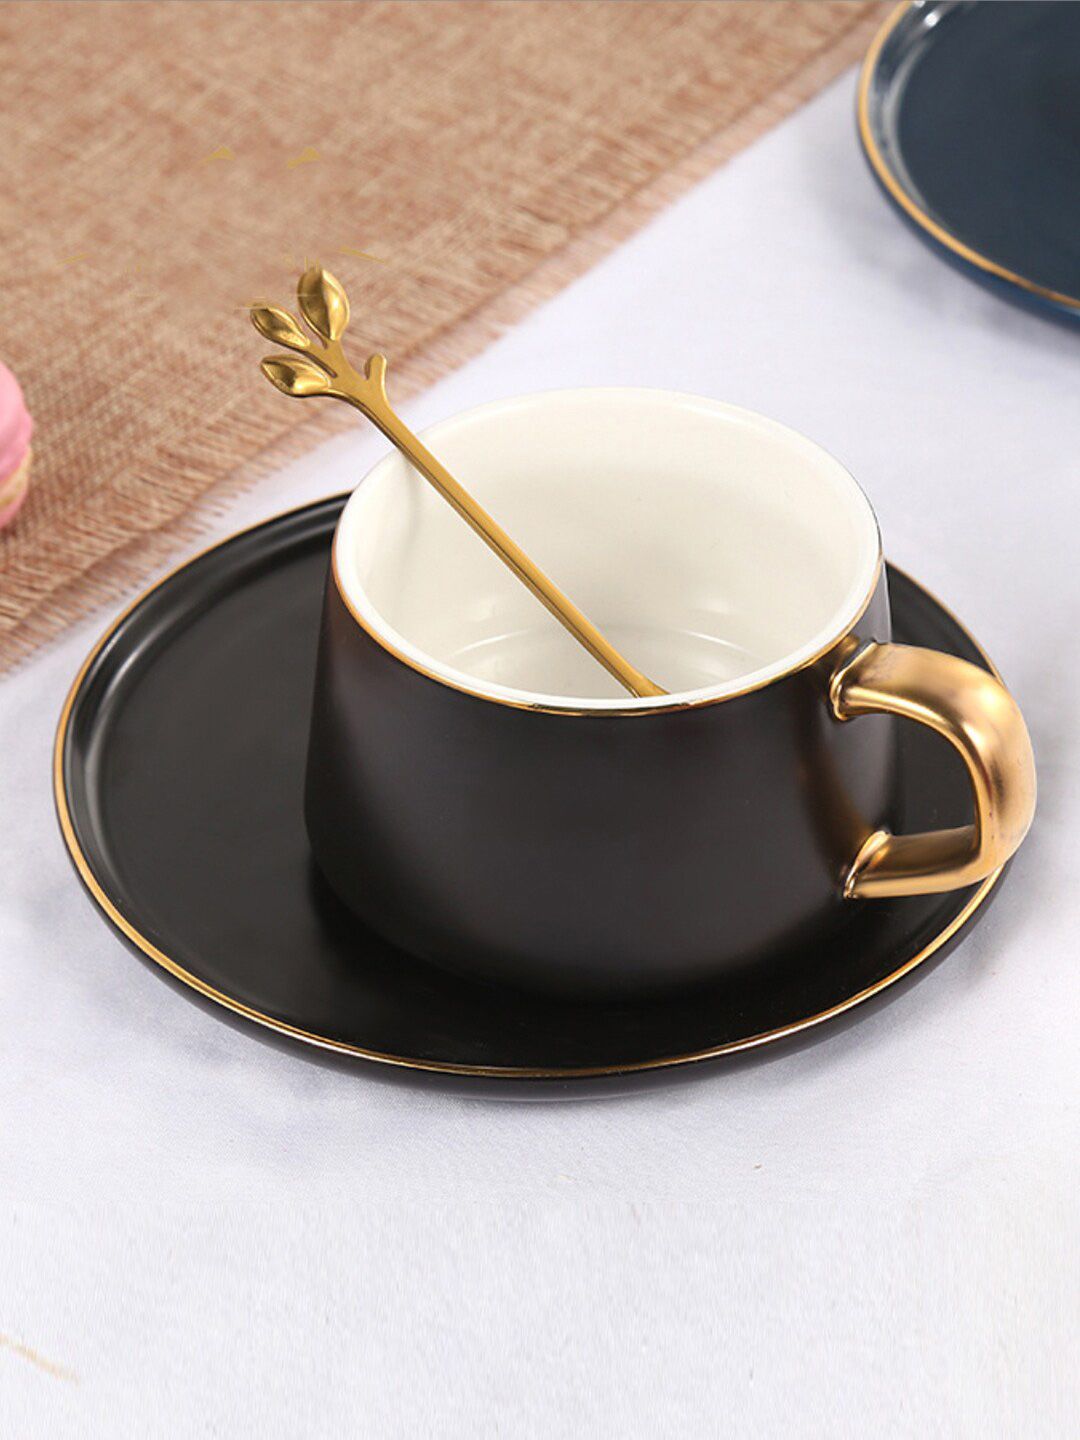 Nestasia Black Cup & Saucer With Gold-Toned Spoon Price in India